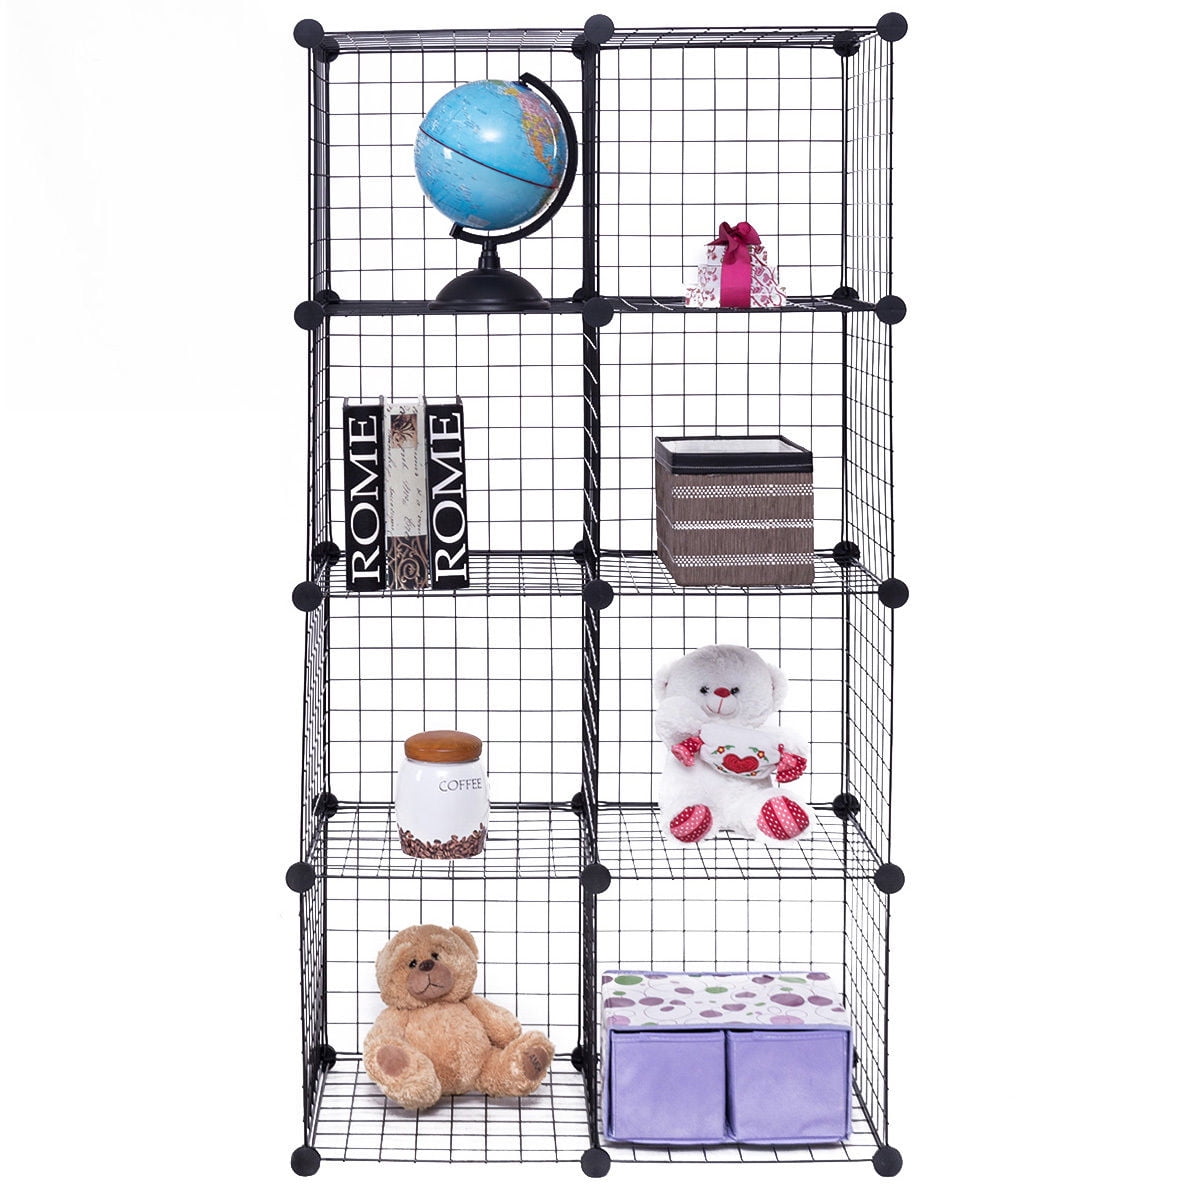 Home DIY 8 Cubes Grid Wire Storage Cube Shelves Bookcase Display Organizer New 